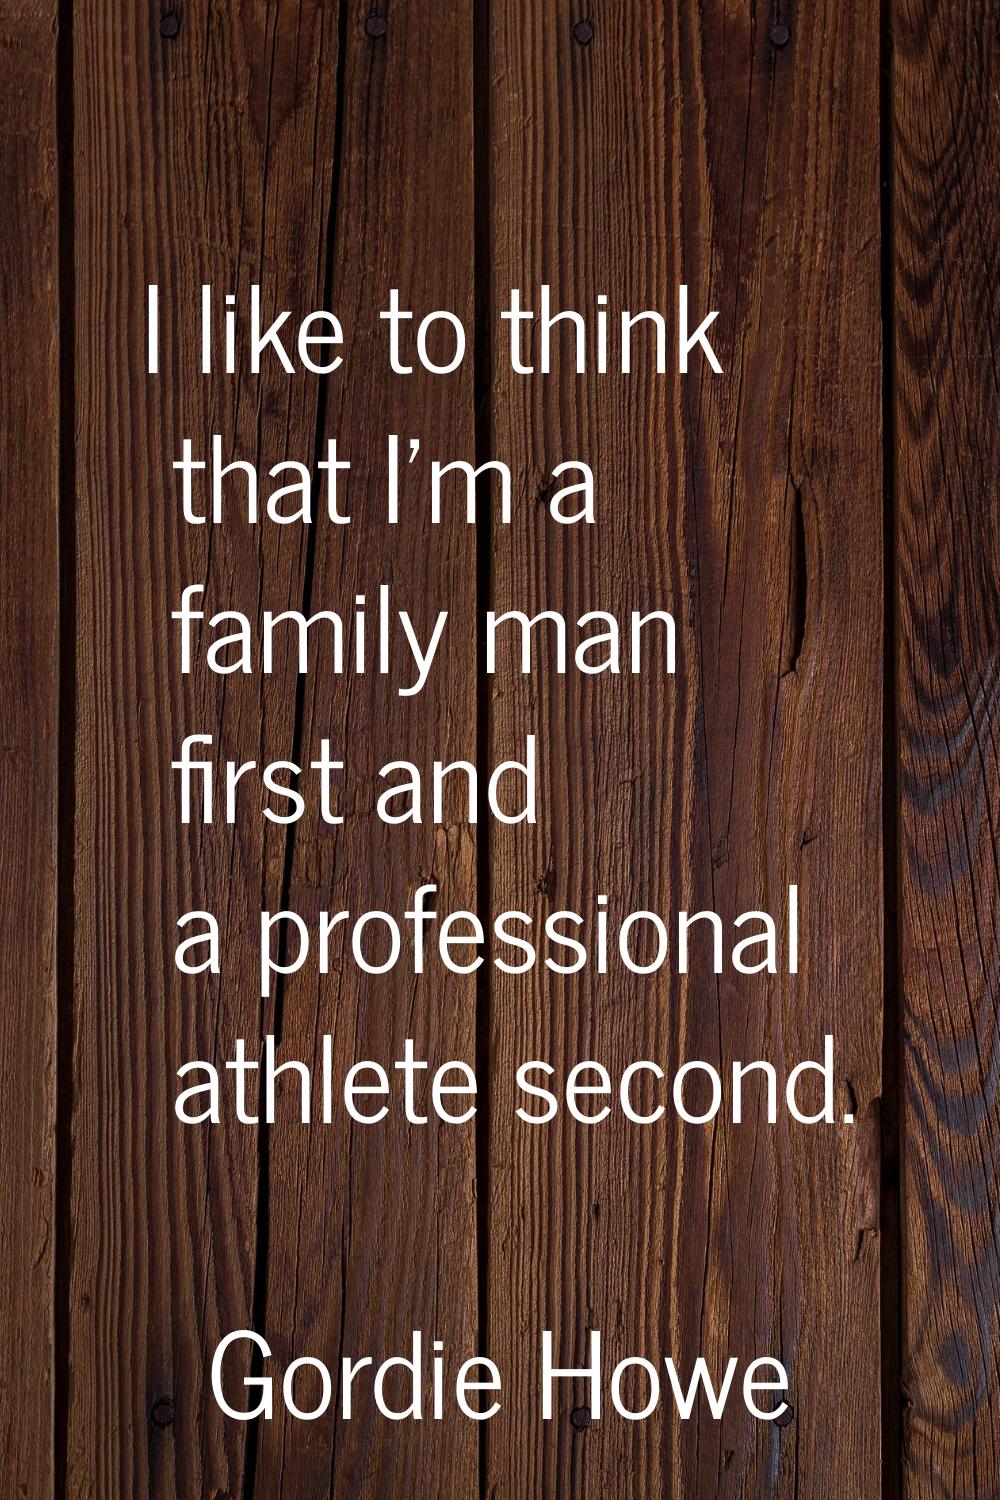 I like to think that I'm a family man first and a professional athlete second.